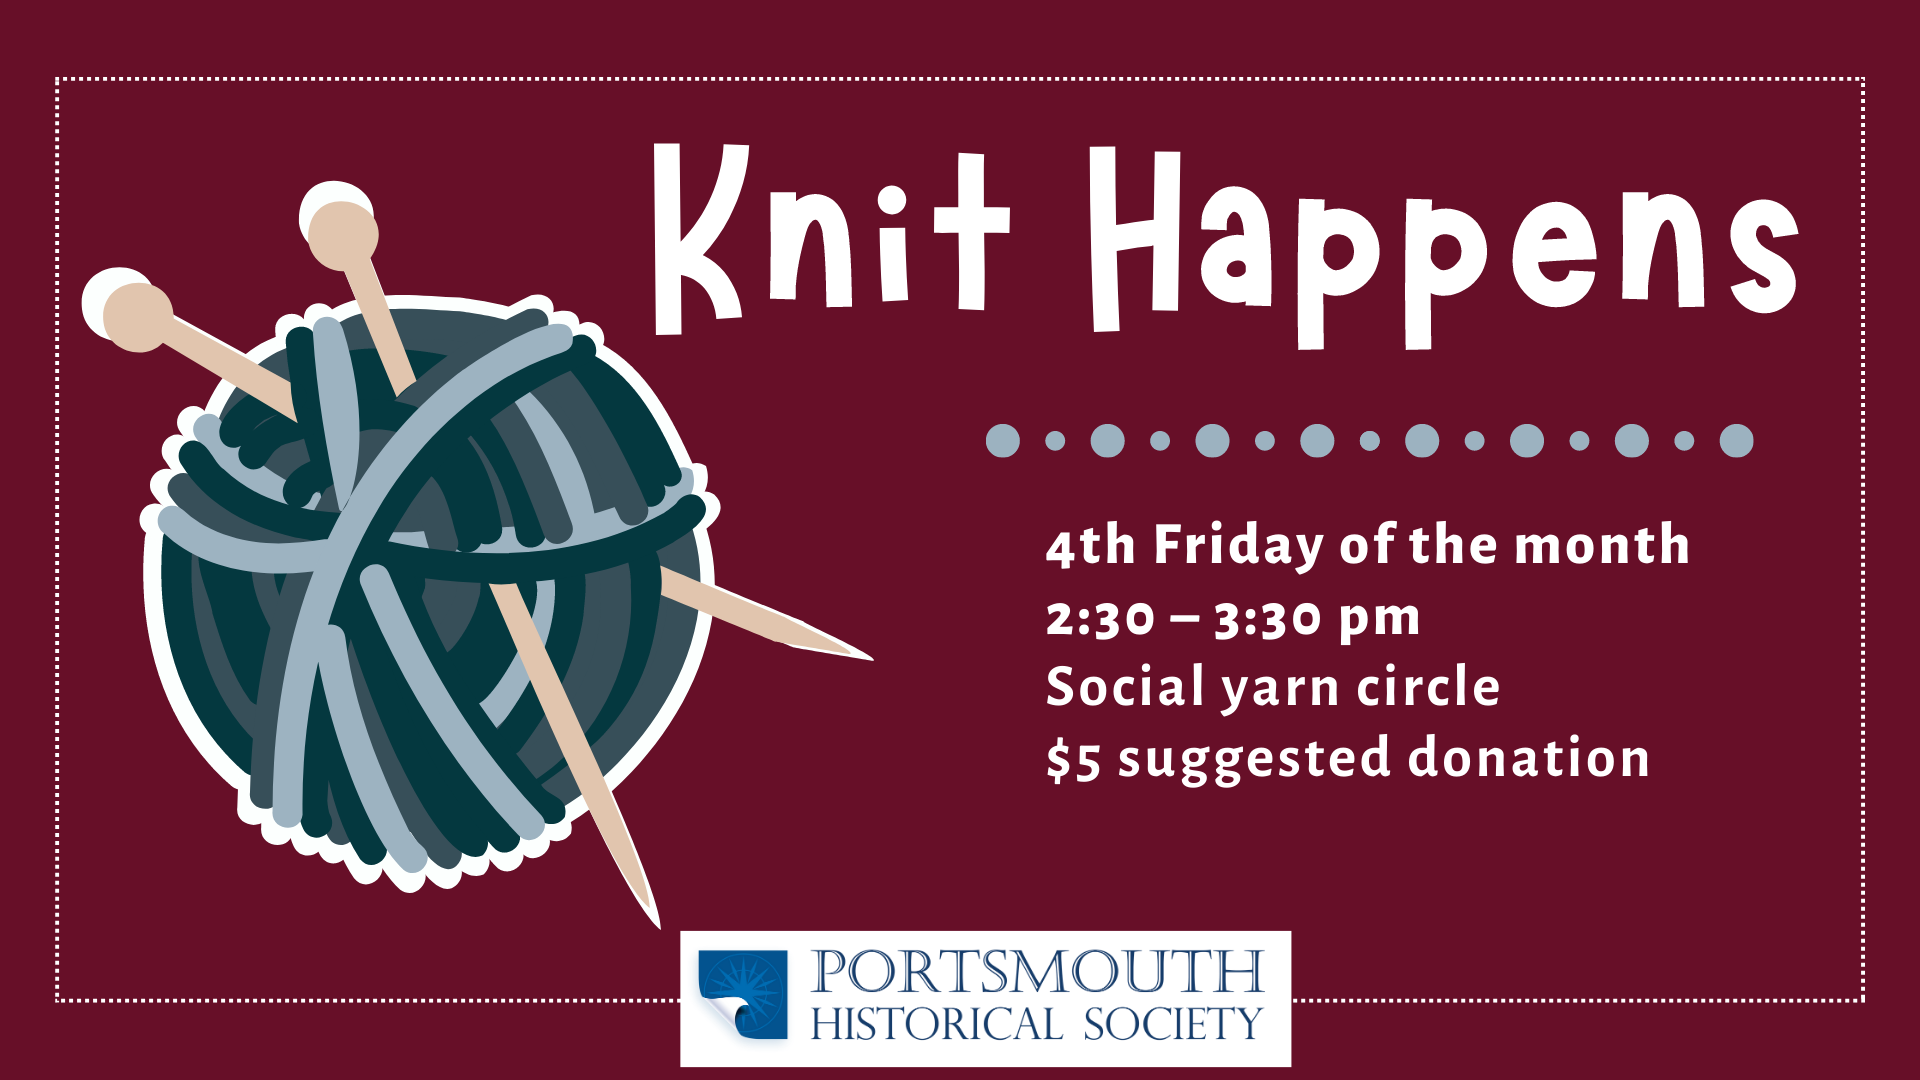 Knit Happens Program Image. Burgundy background with a ball of different color blue yarn and knitting needles poke through it on the left-hand side. Right-hand side has white text that reads: 4th Friday of the month 2:30 – 3:30 pm Social yarn circle $5 suggested donation